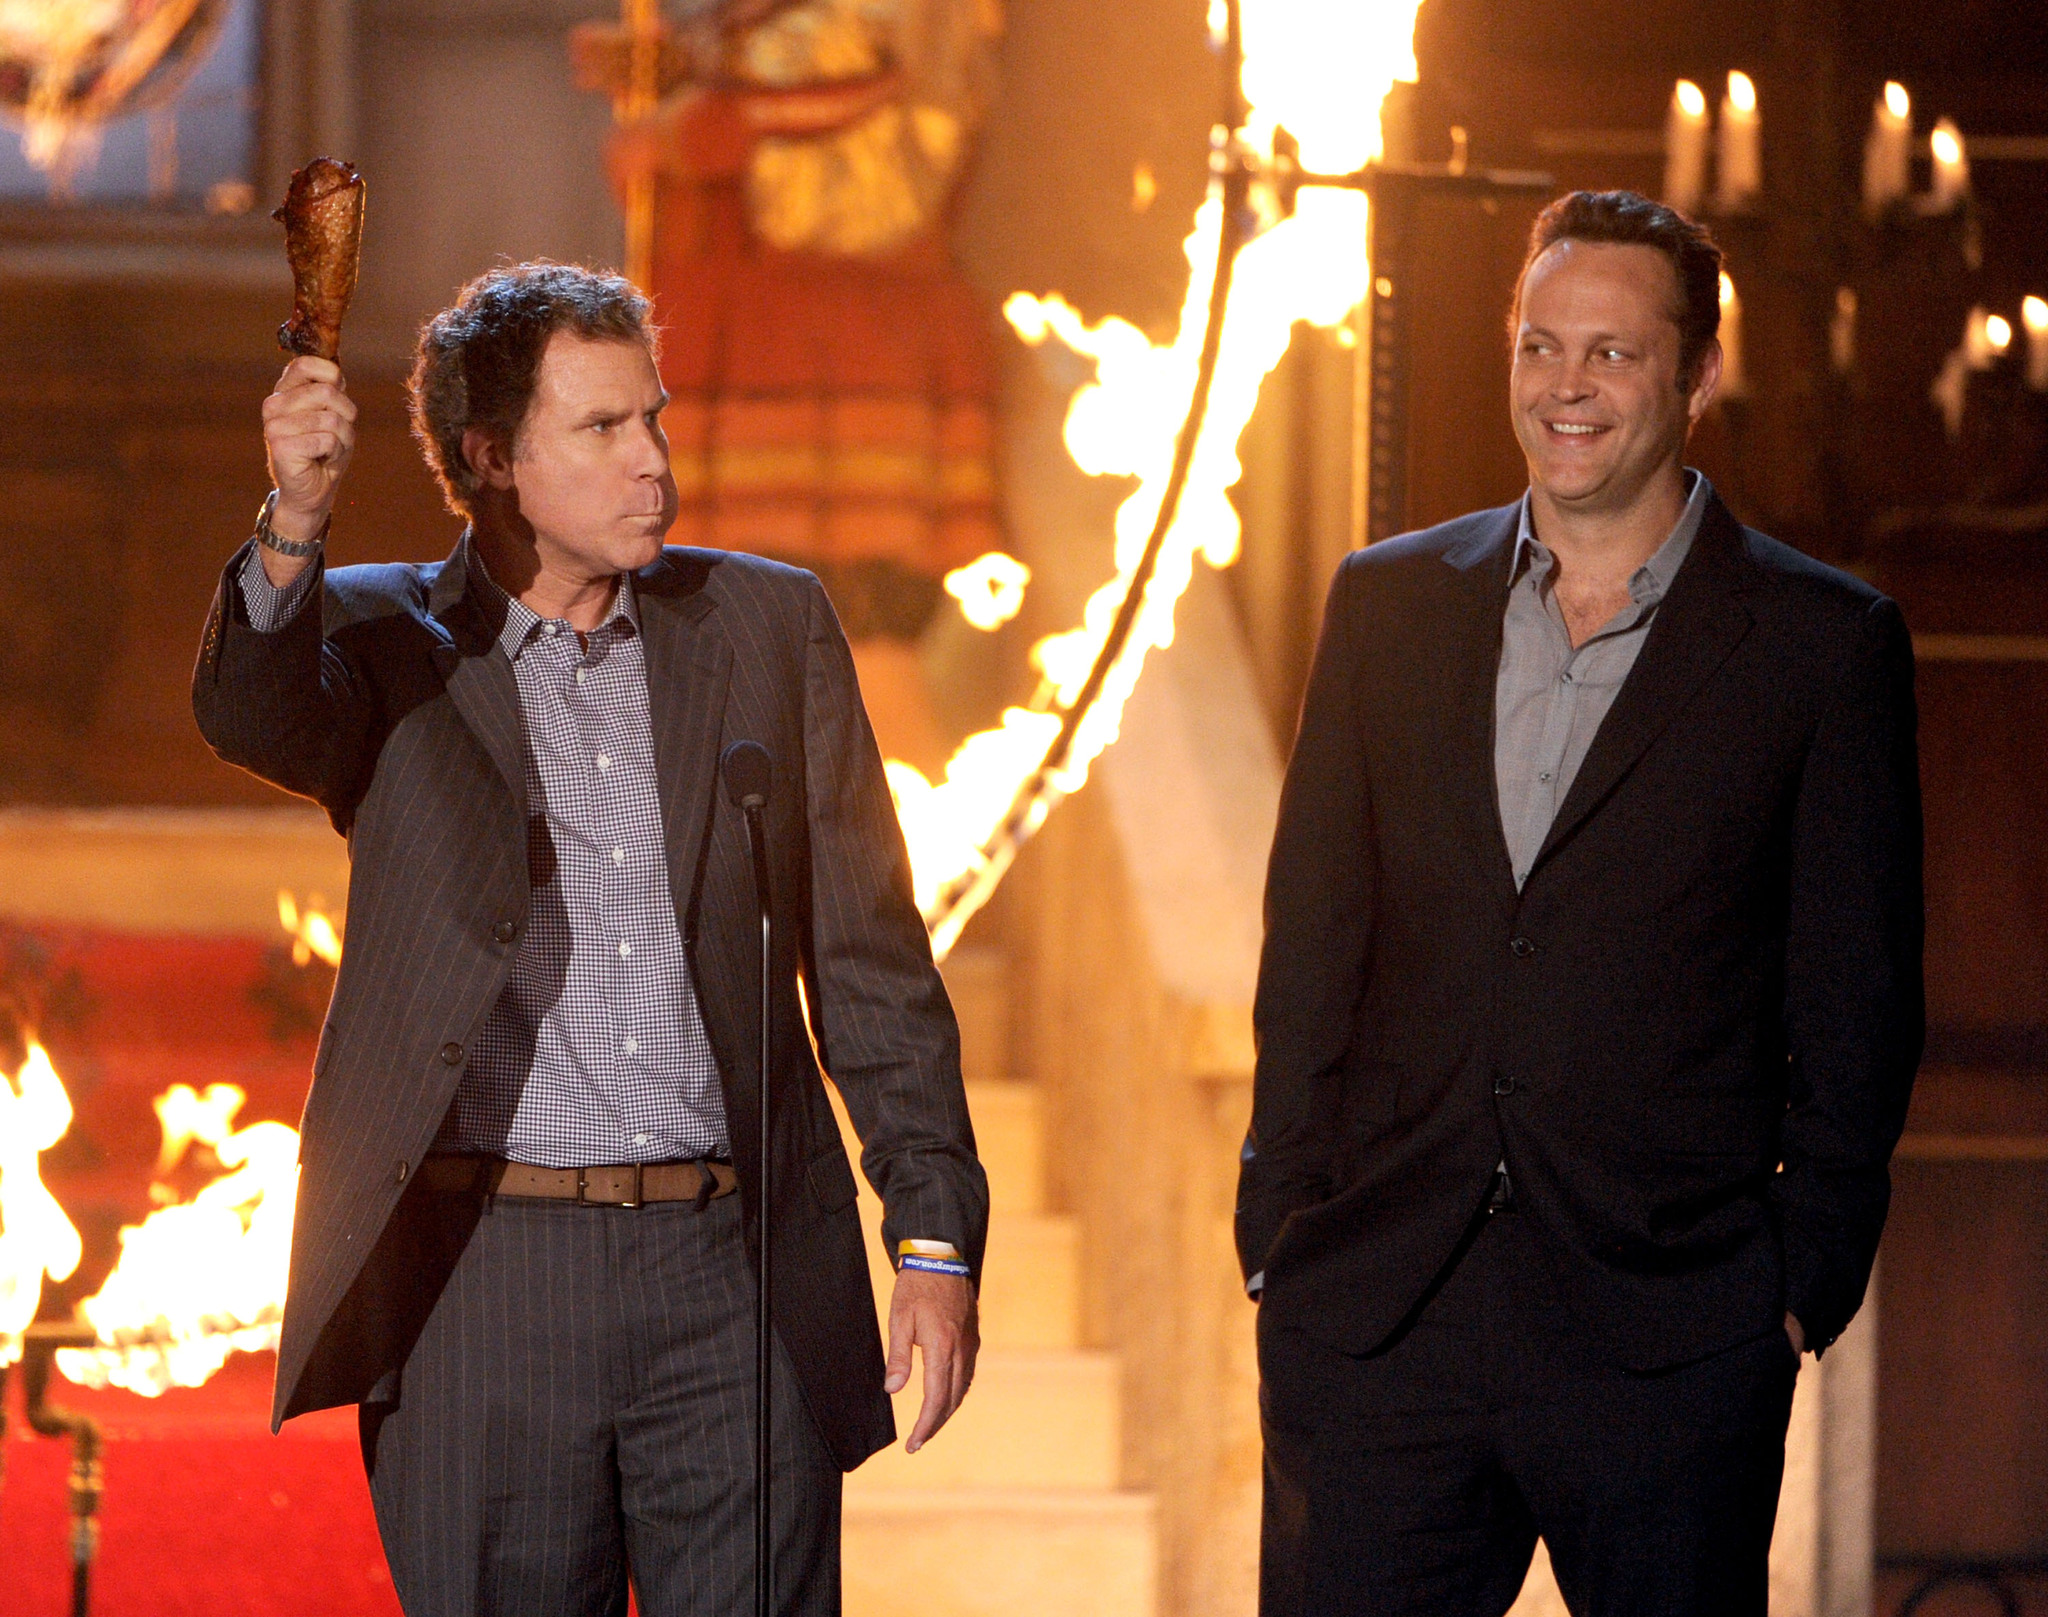 Vince Vaughn and Will Ferrell